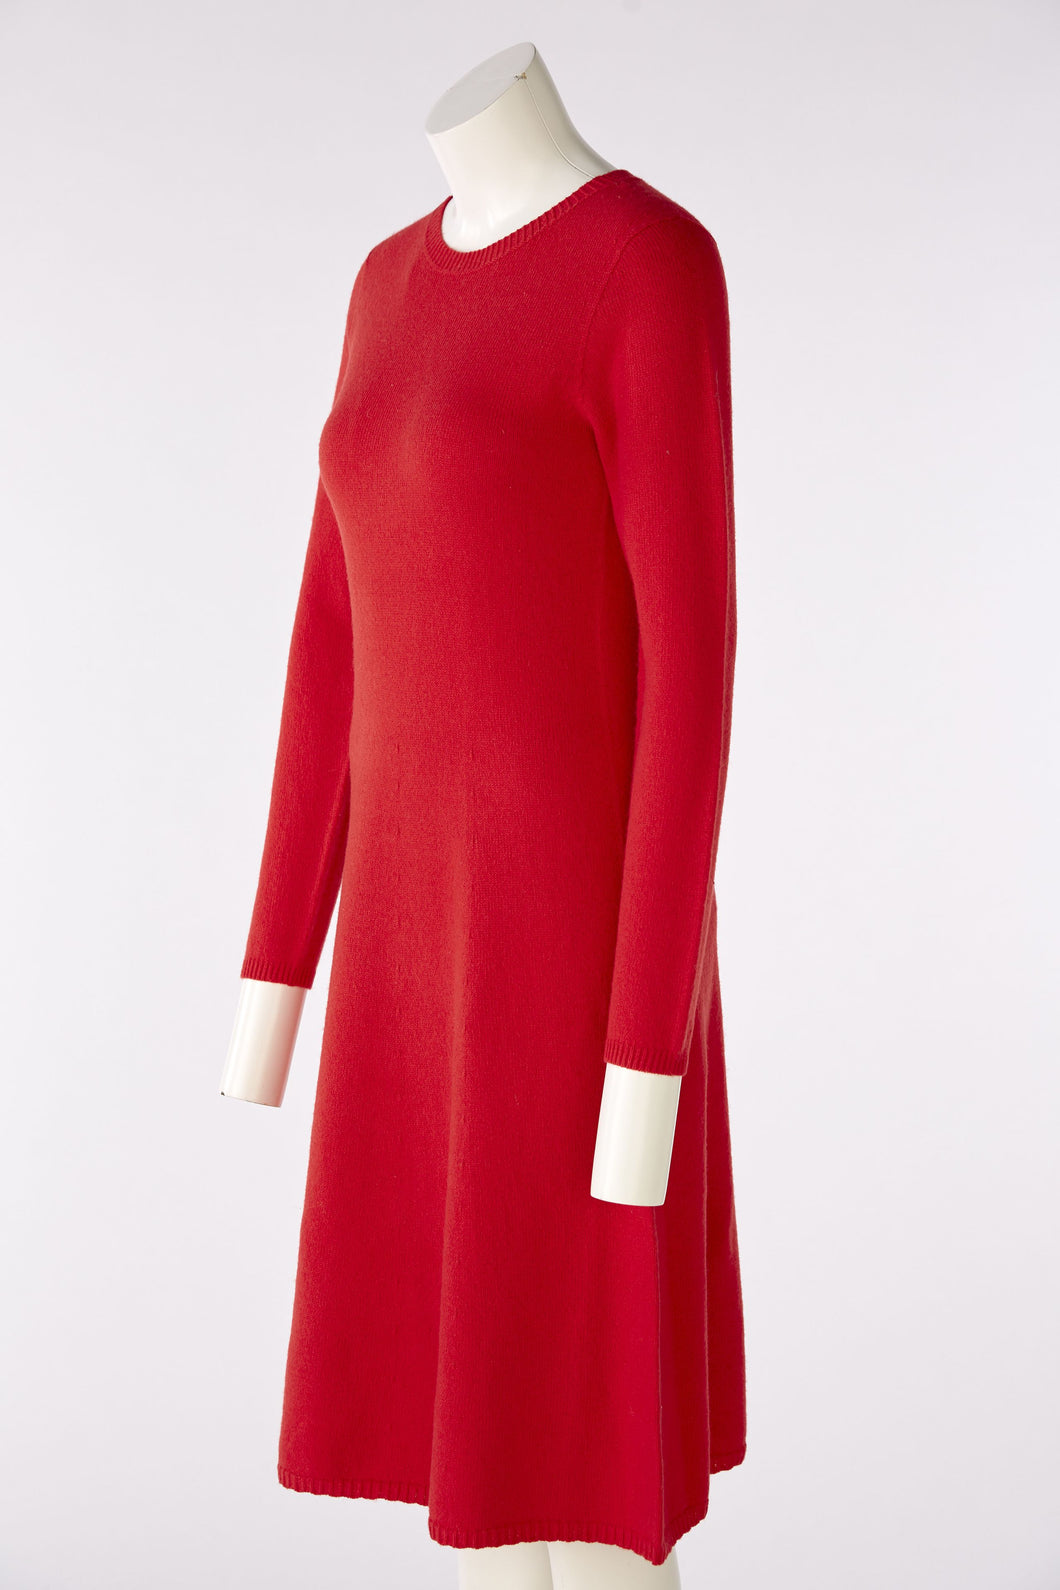 Oui - Knitted Wool Dress in Red